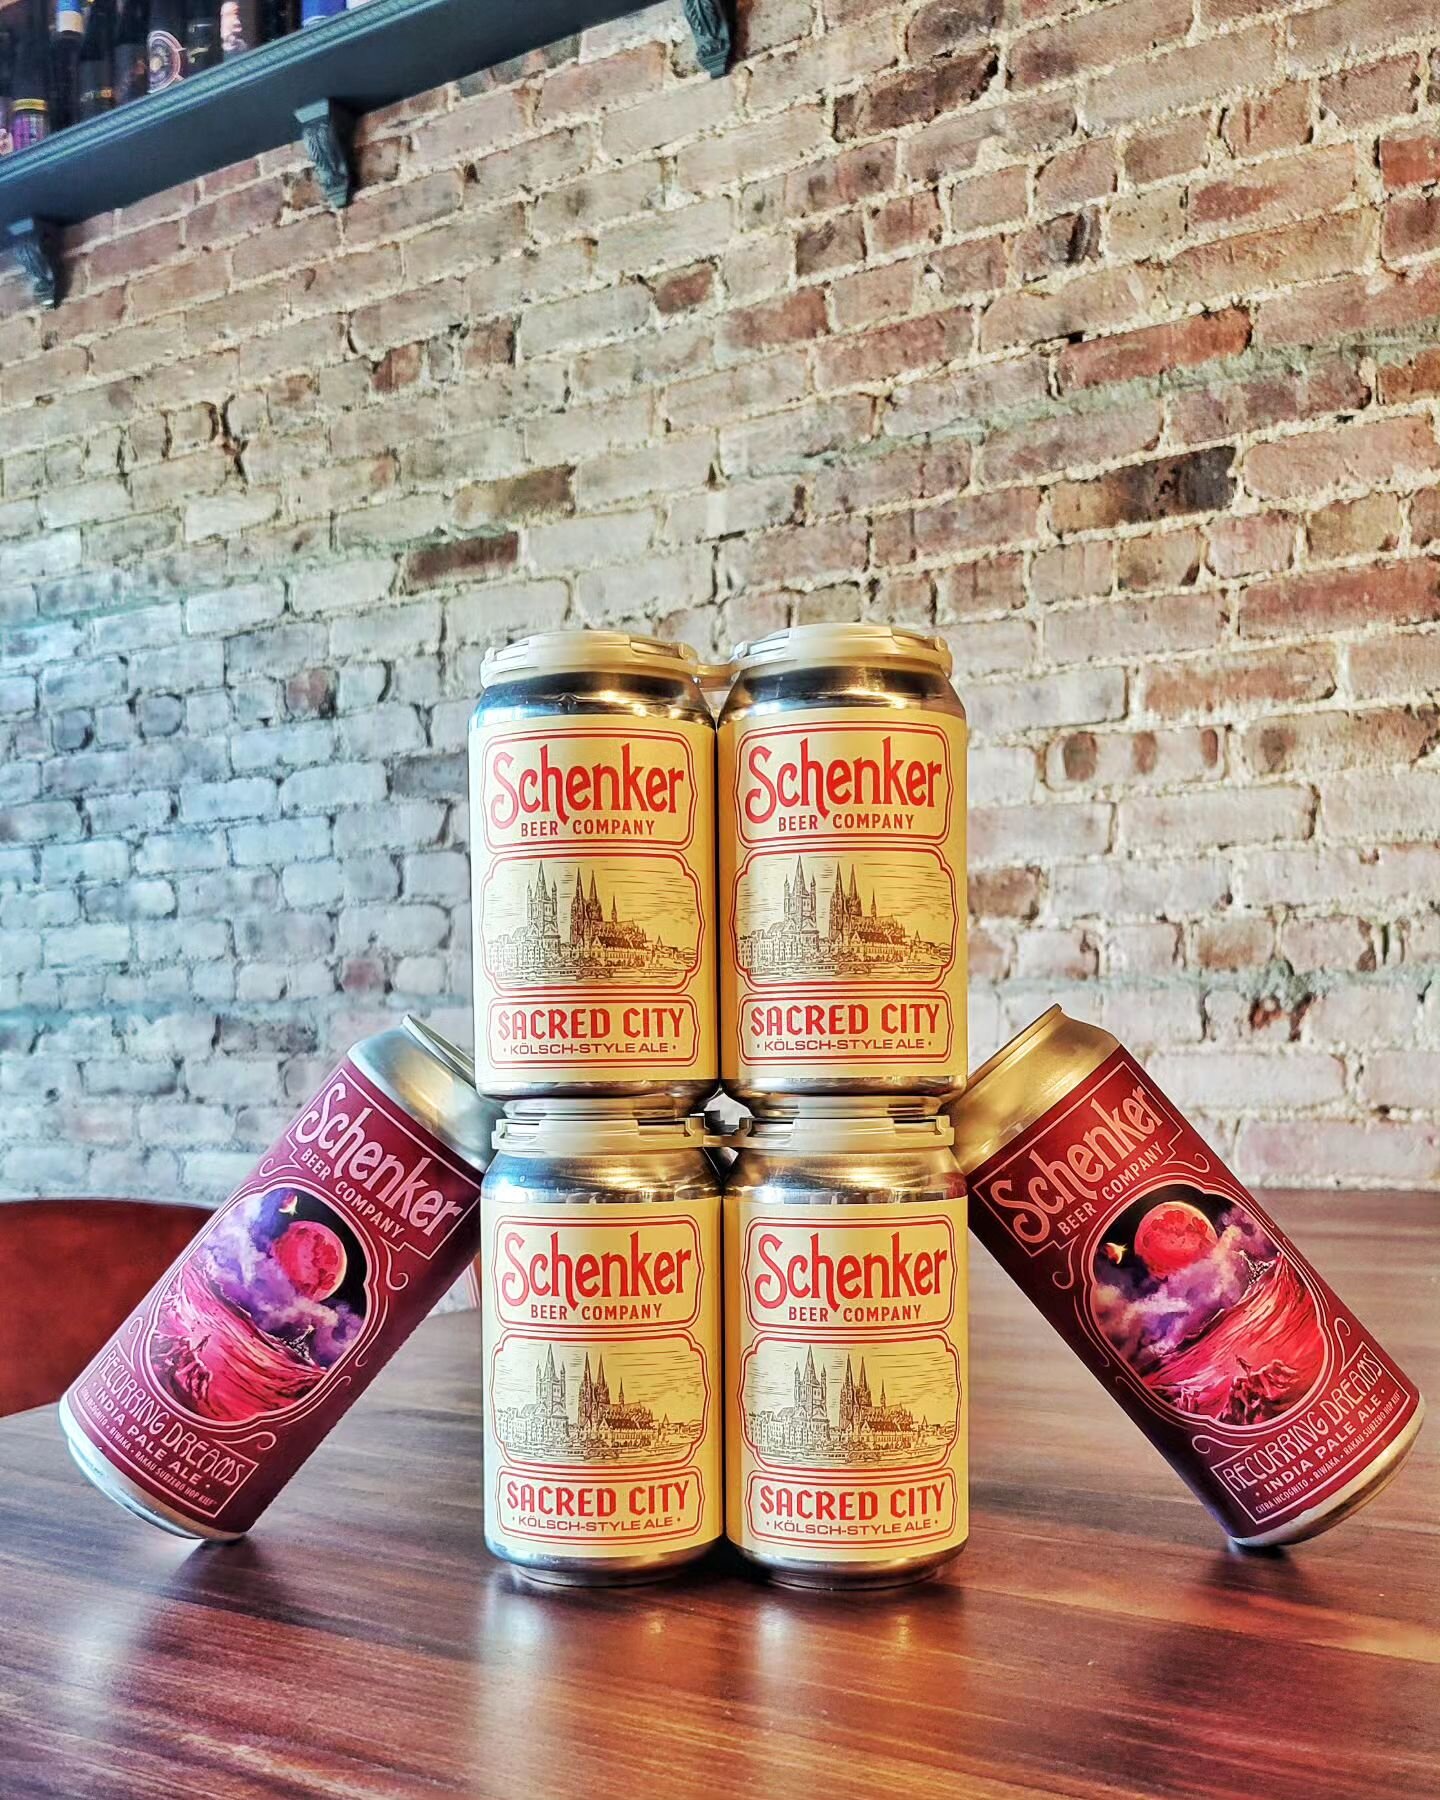 Added to Queue:

Two brand new beers from our friends @schenkerbeer have landed for this week. For those who don't know, Schenker is the reincarnation of the much missed Folksbier, a Carroll Gardens staple brewery that shuttered its doors during the 